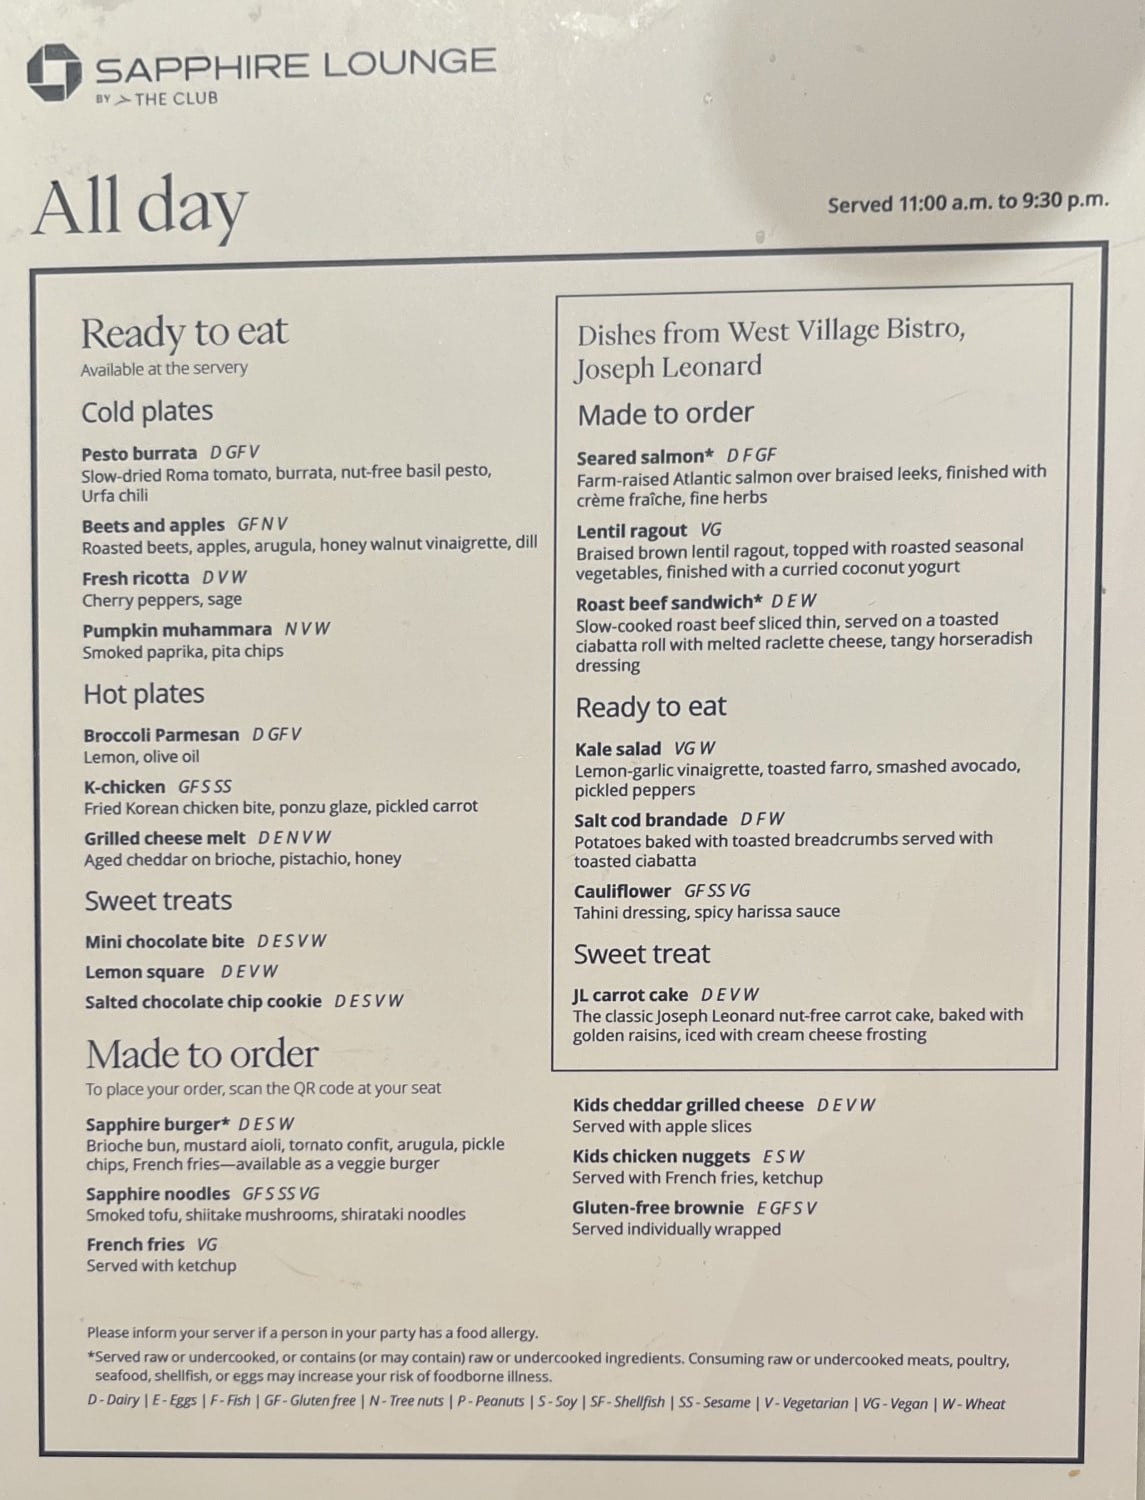 chase sapphire lounge laguardia airport all day menu